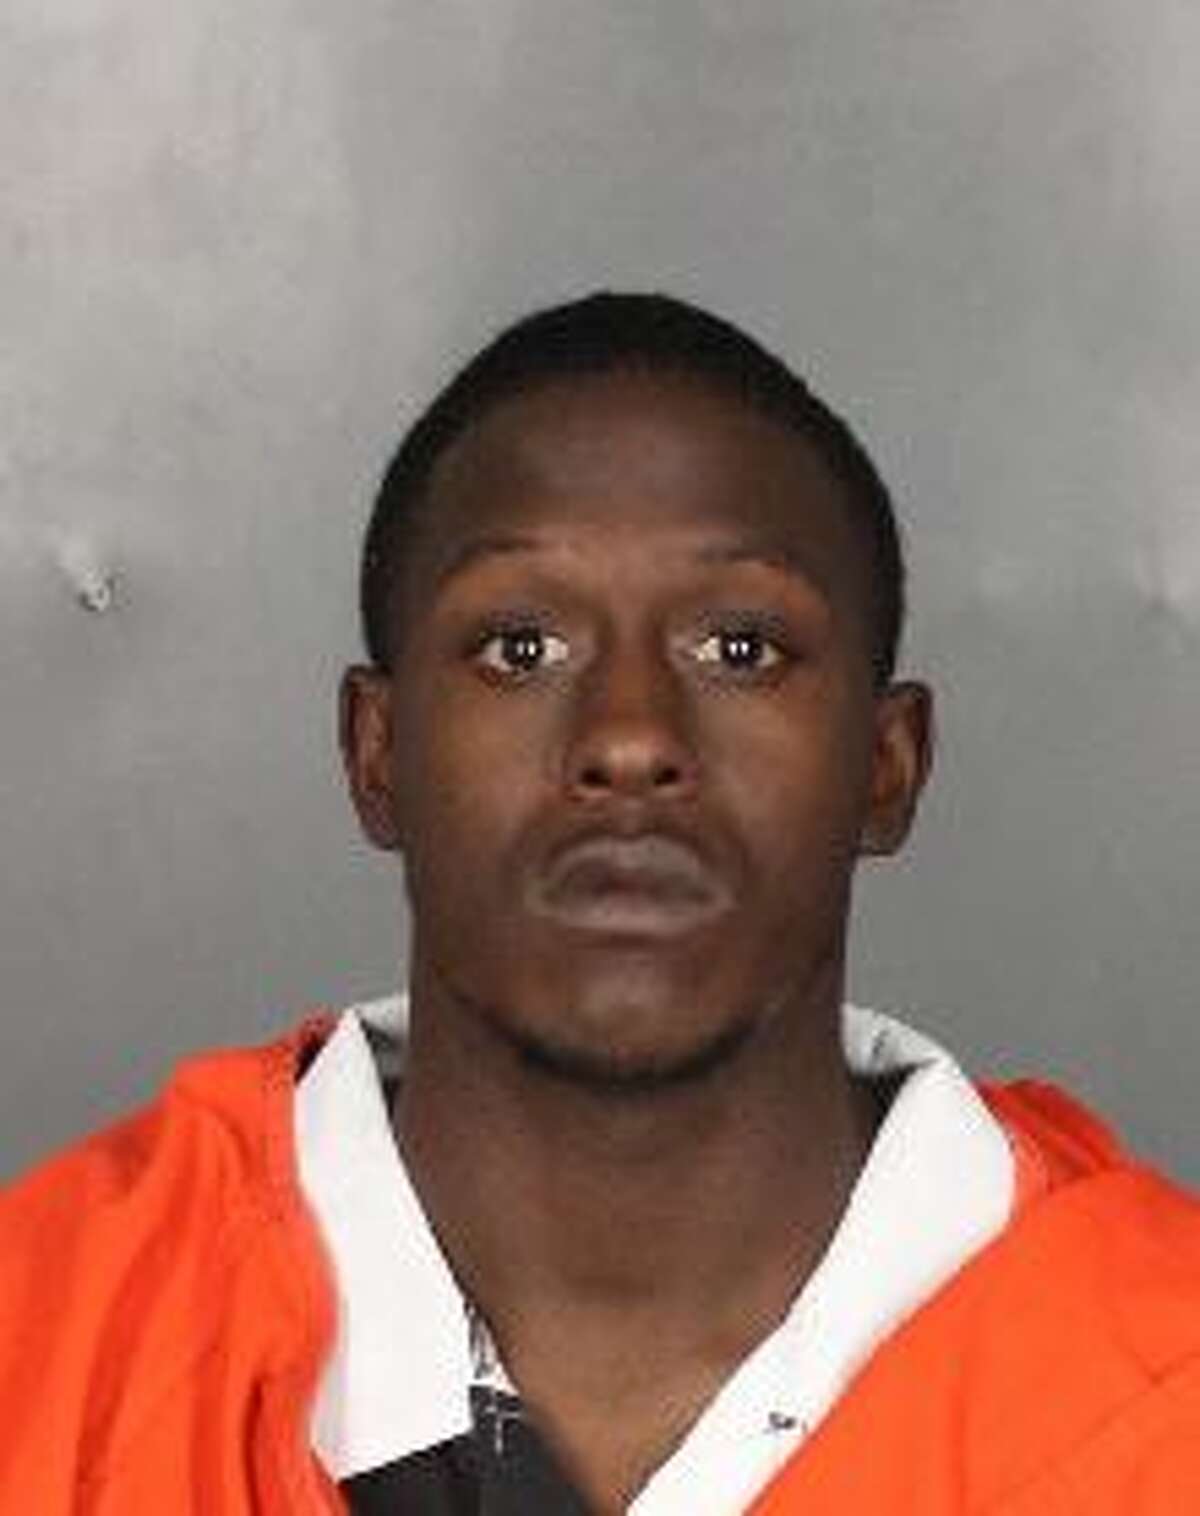 Tyrice Ladshaun Irby, 23, was arrested on a state jail felony charge of forgery of a financial instrument.